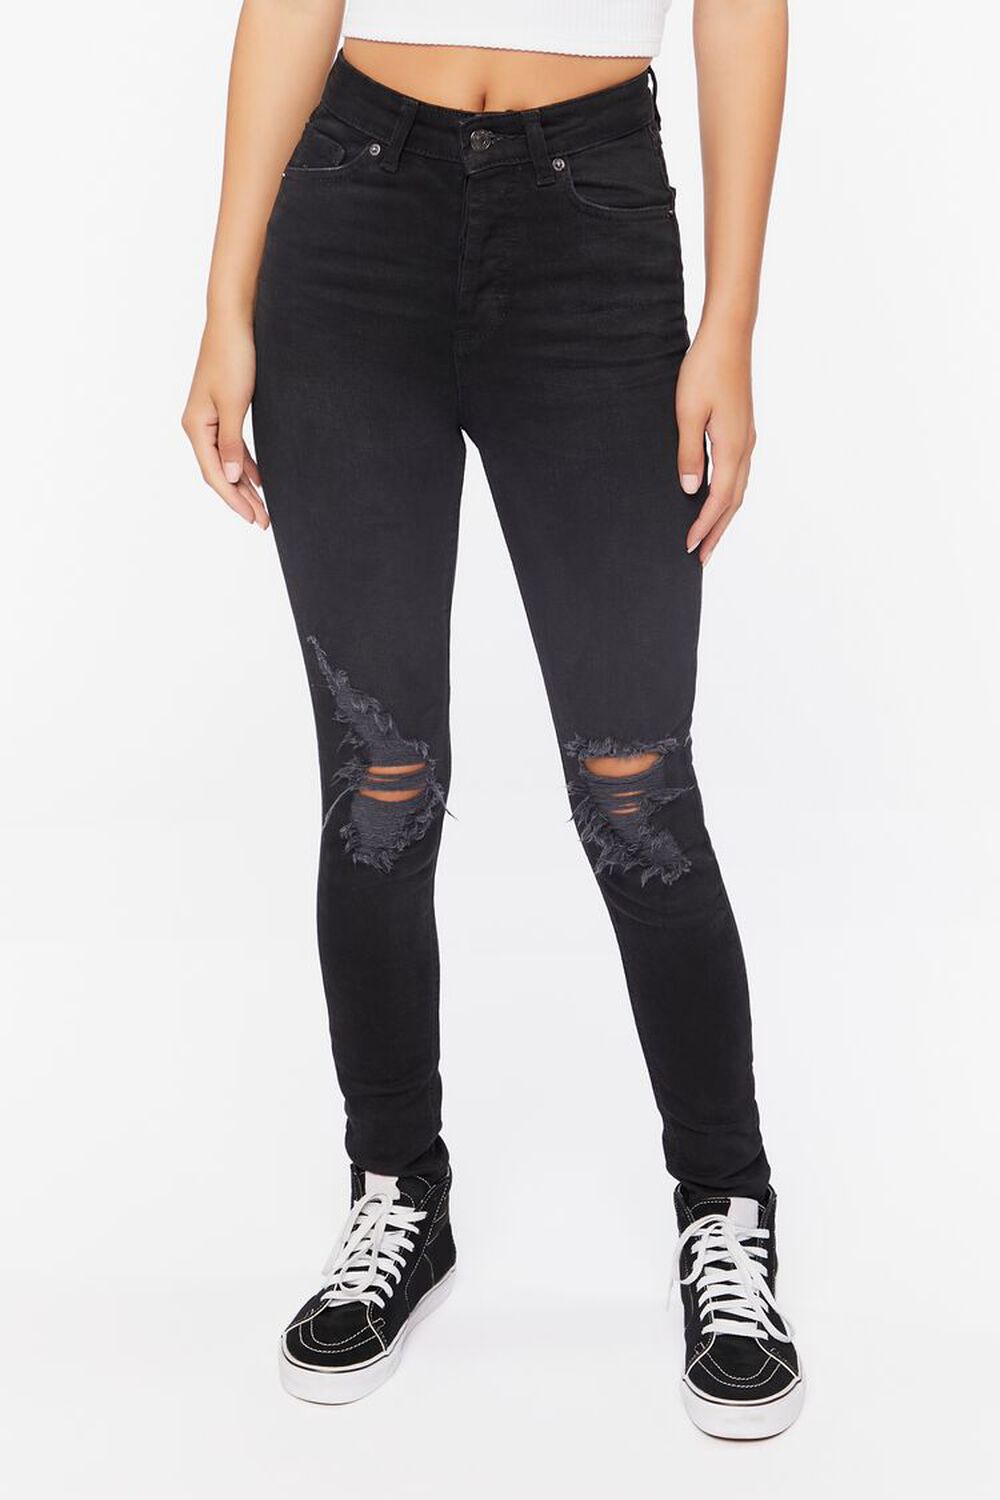 WASHED BLACK Recycled Cotton High-Rise Distressed Jeans, image 1